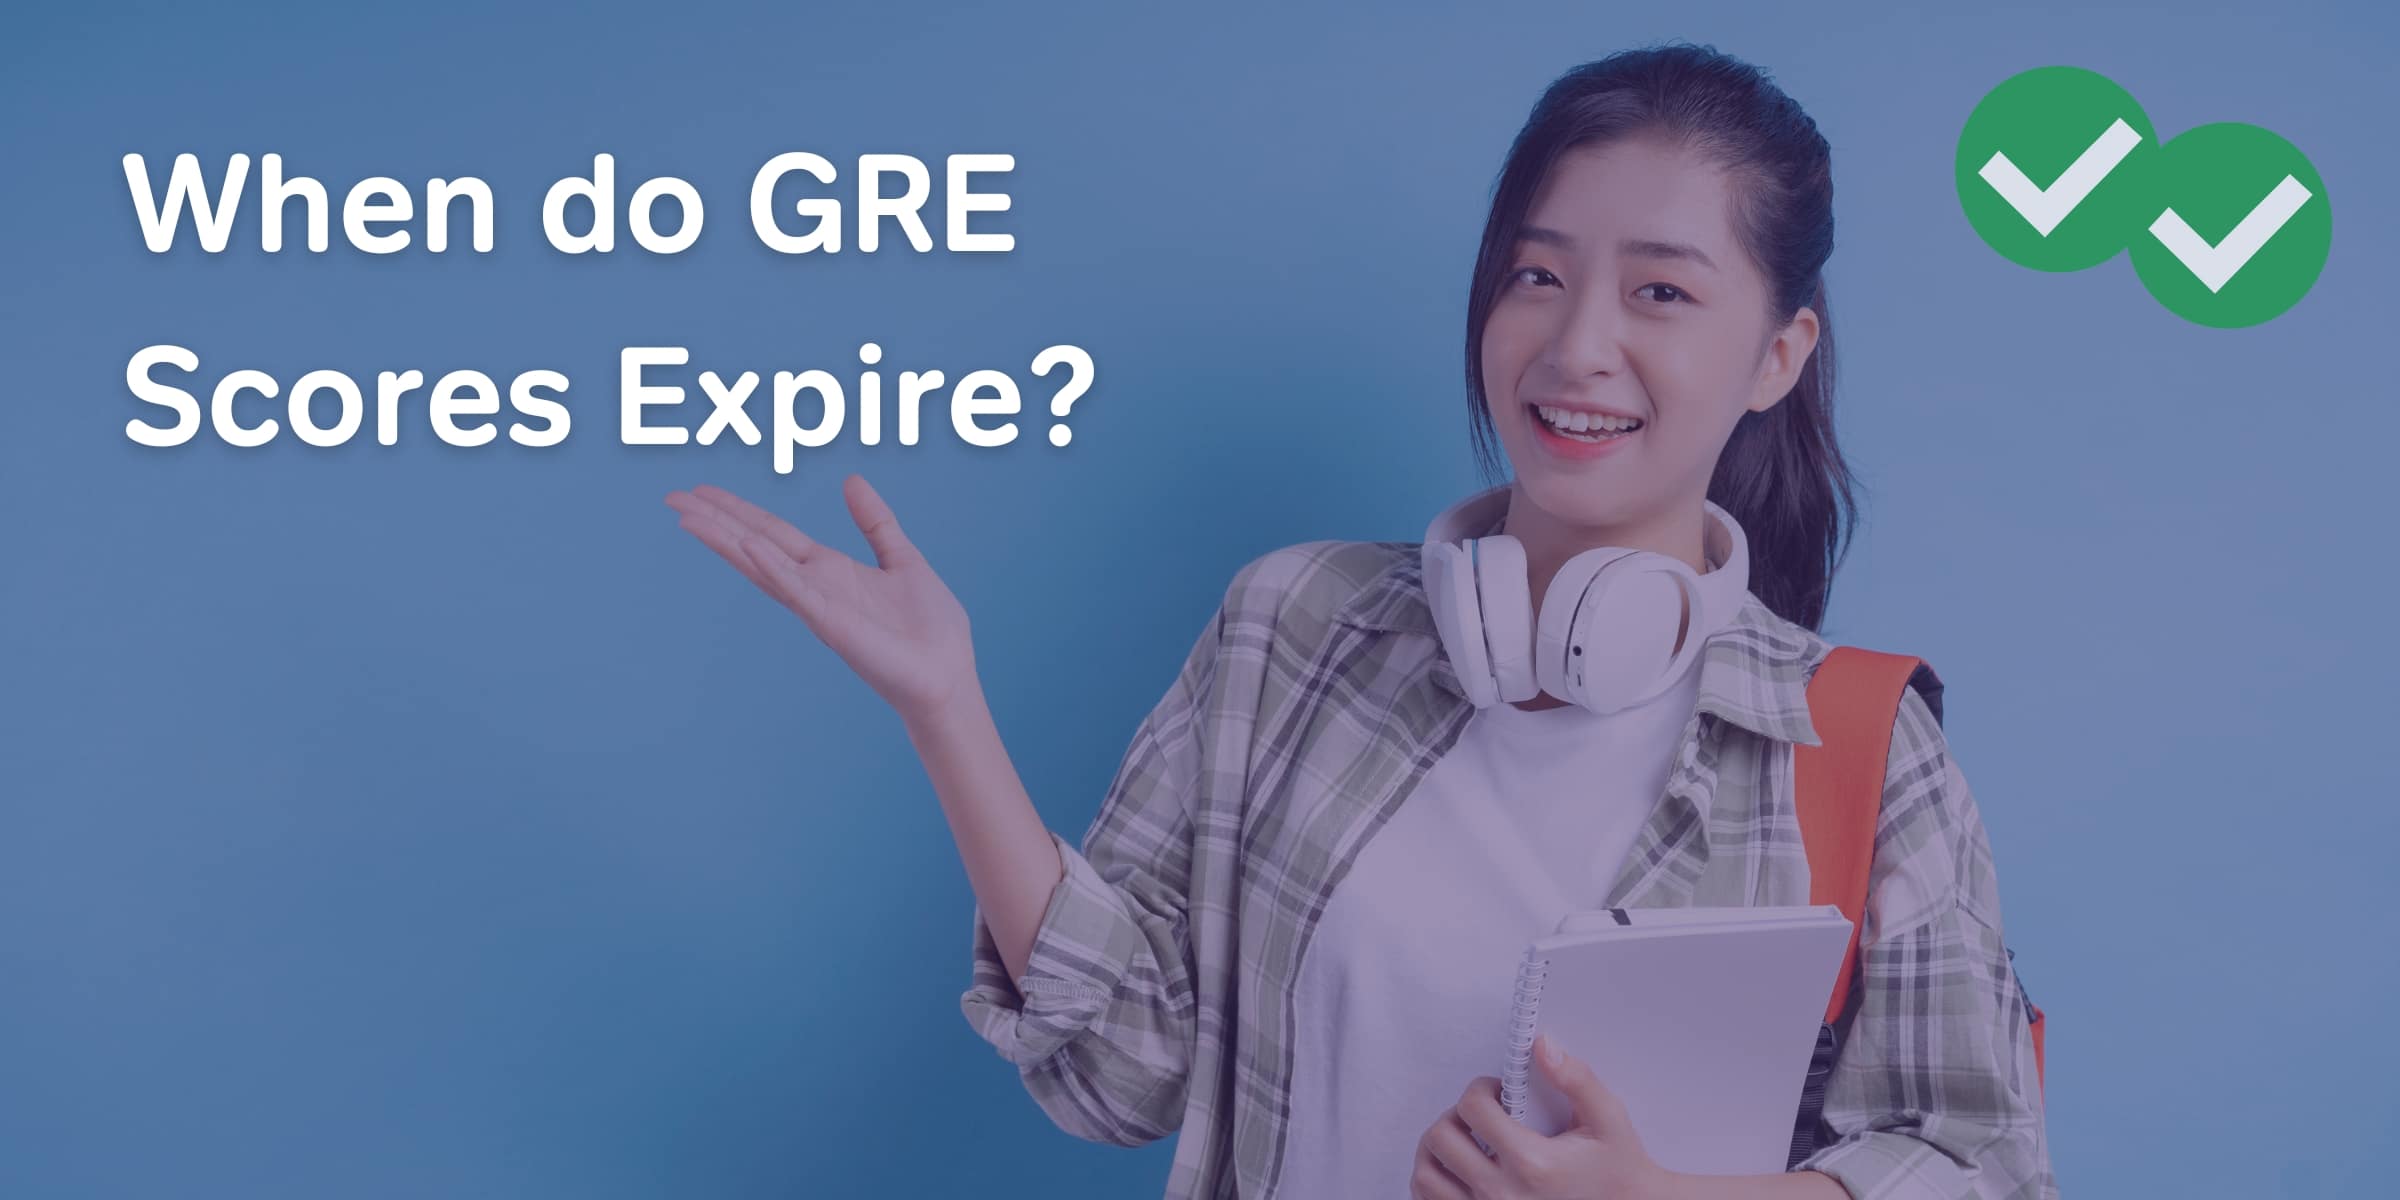 A student with her arm raised with the text "When do GRE scores expire?" above